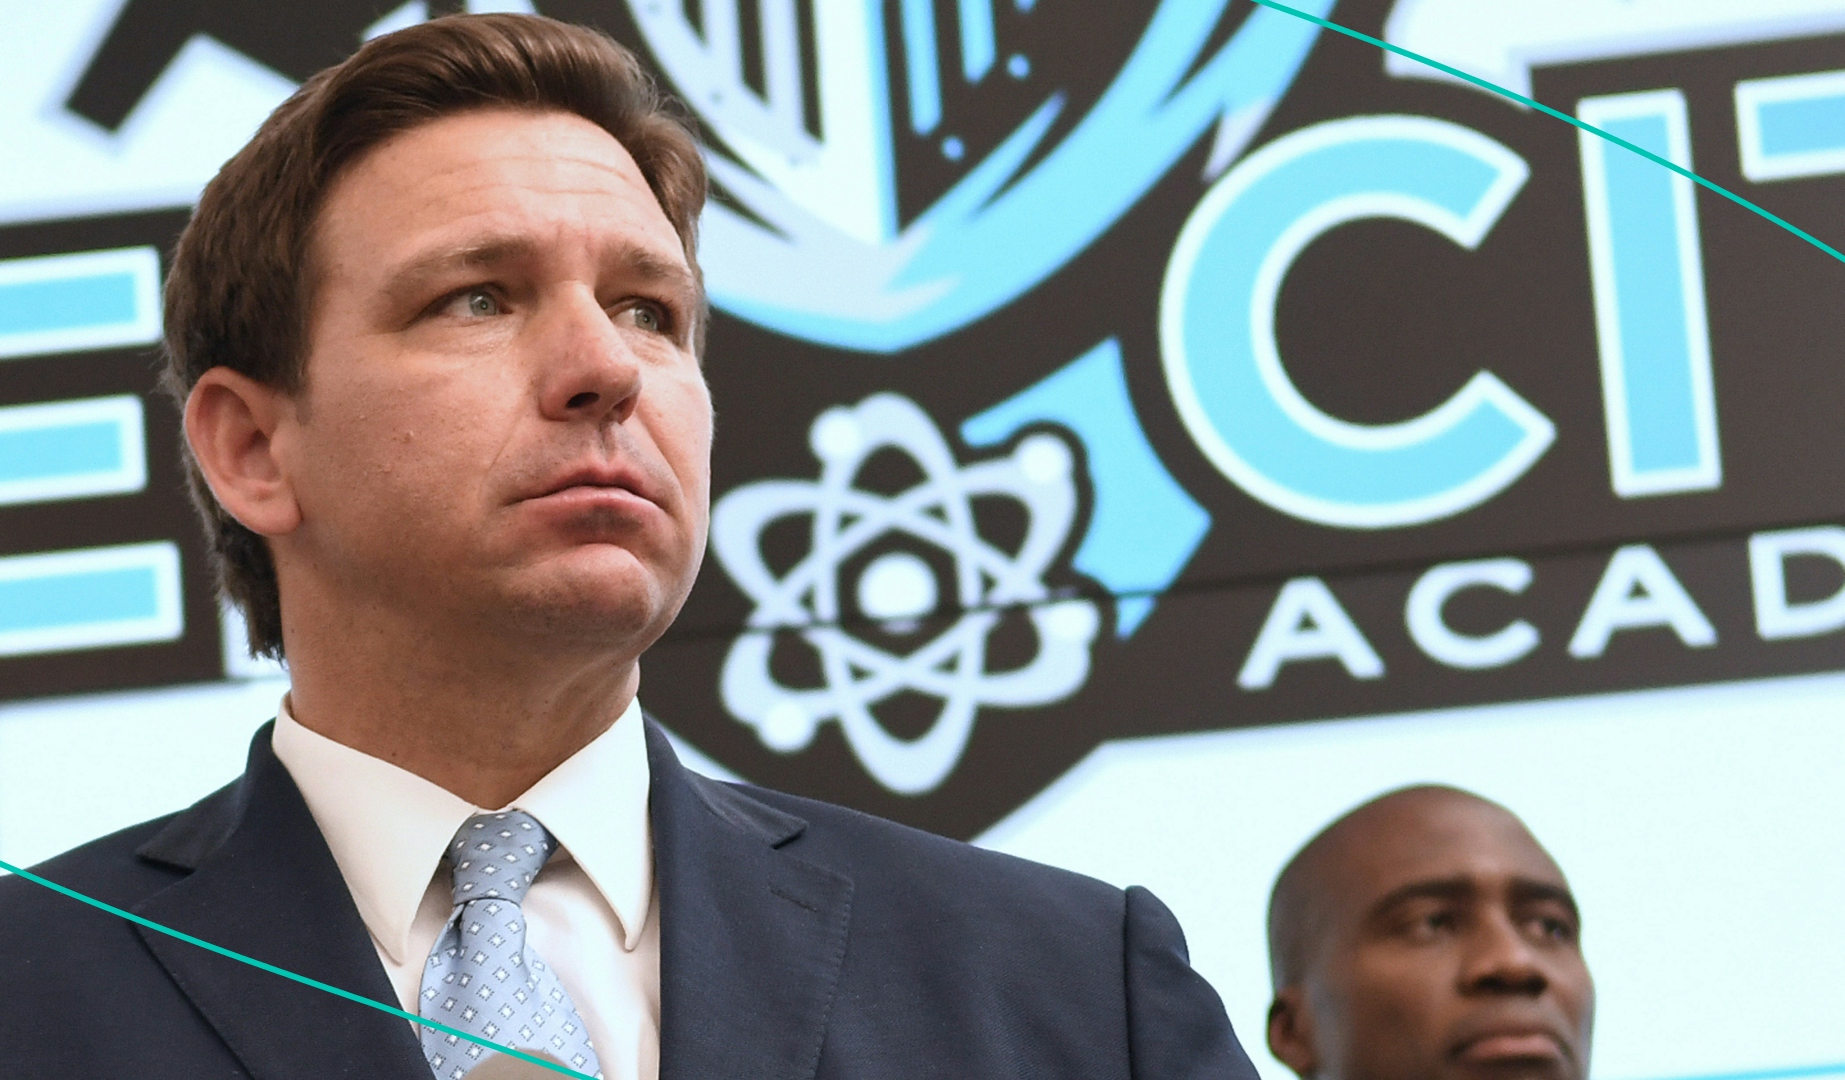 Florida Gov. Ron DeSantis speaks during a press conference before newly appointed state Surgeon General Dr. Joseph Ladapo